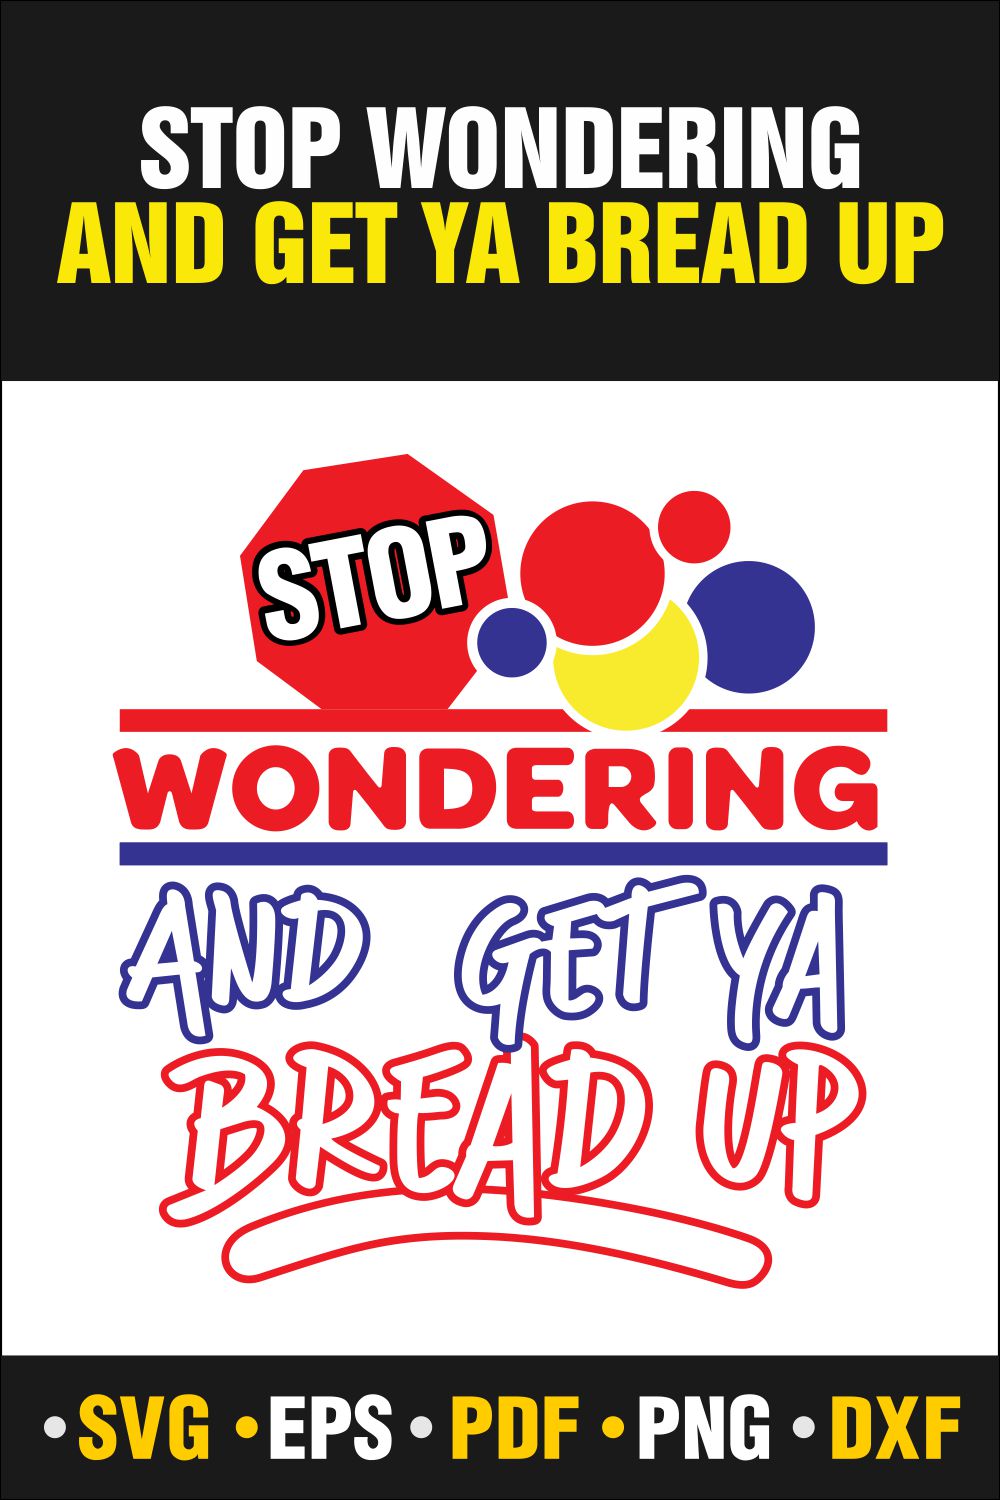 Stop Wondering and Get Ya Bread Up Svg, Stop Wondering and Get Ya Bread Up Frame Svg Vector Cut file Cricut, Silhouette, Pdf Png, Dxf, Decal, Sticker, Stencil, Vinyl pinterest preview image.